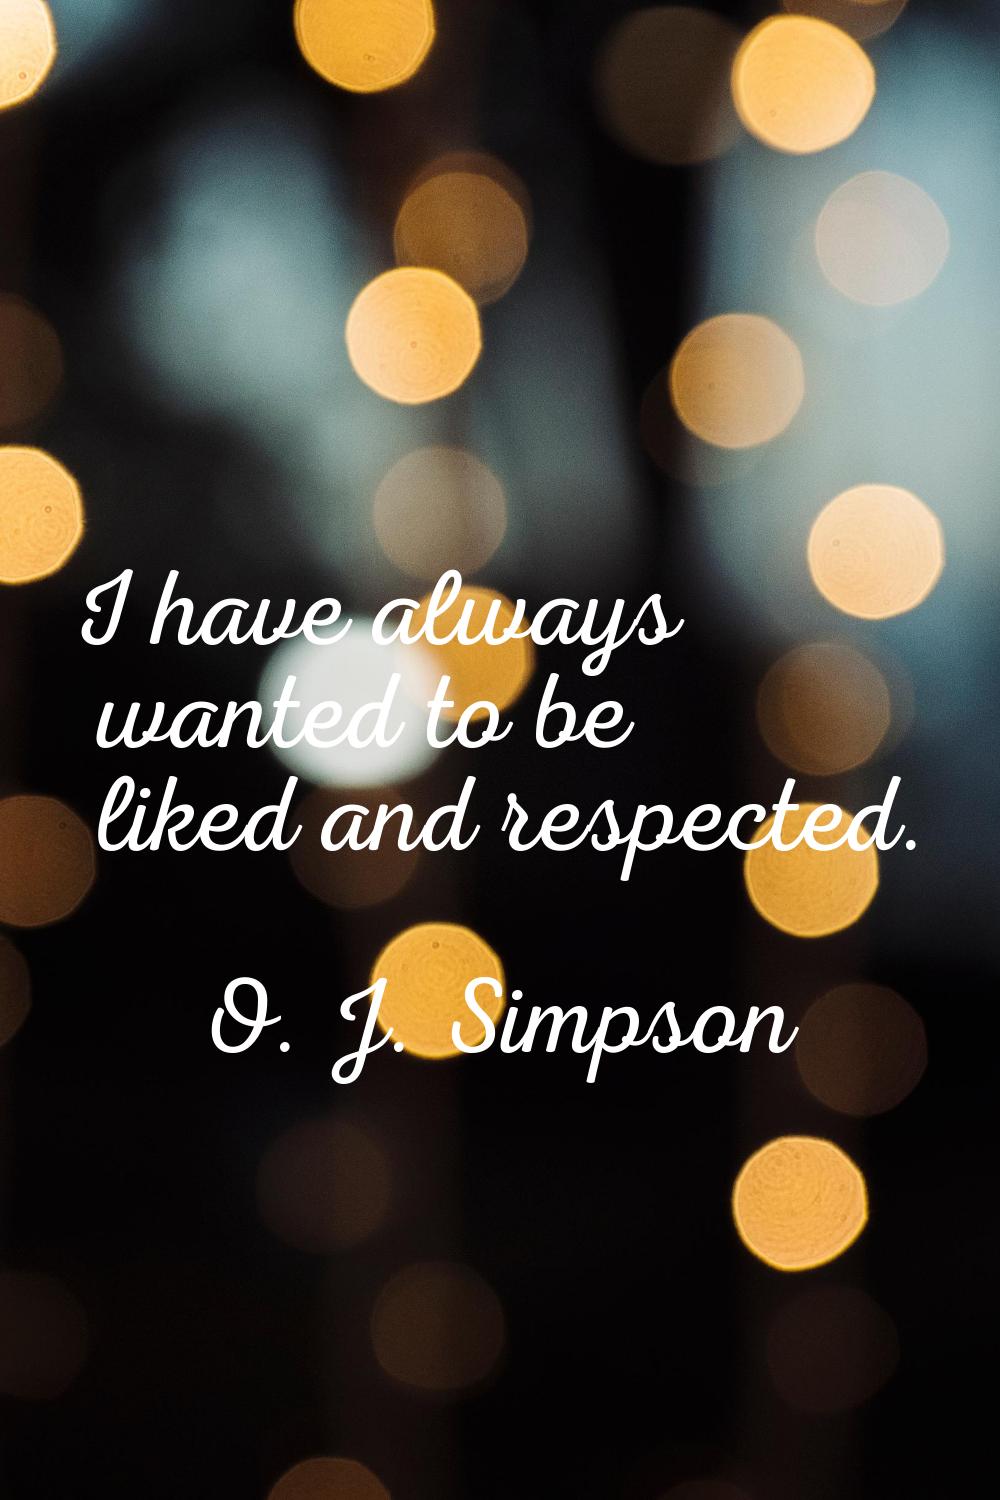 I have always wanted to be liked and respected.